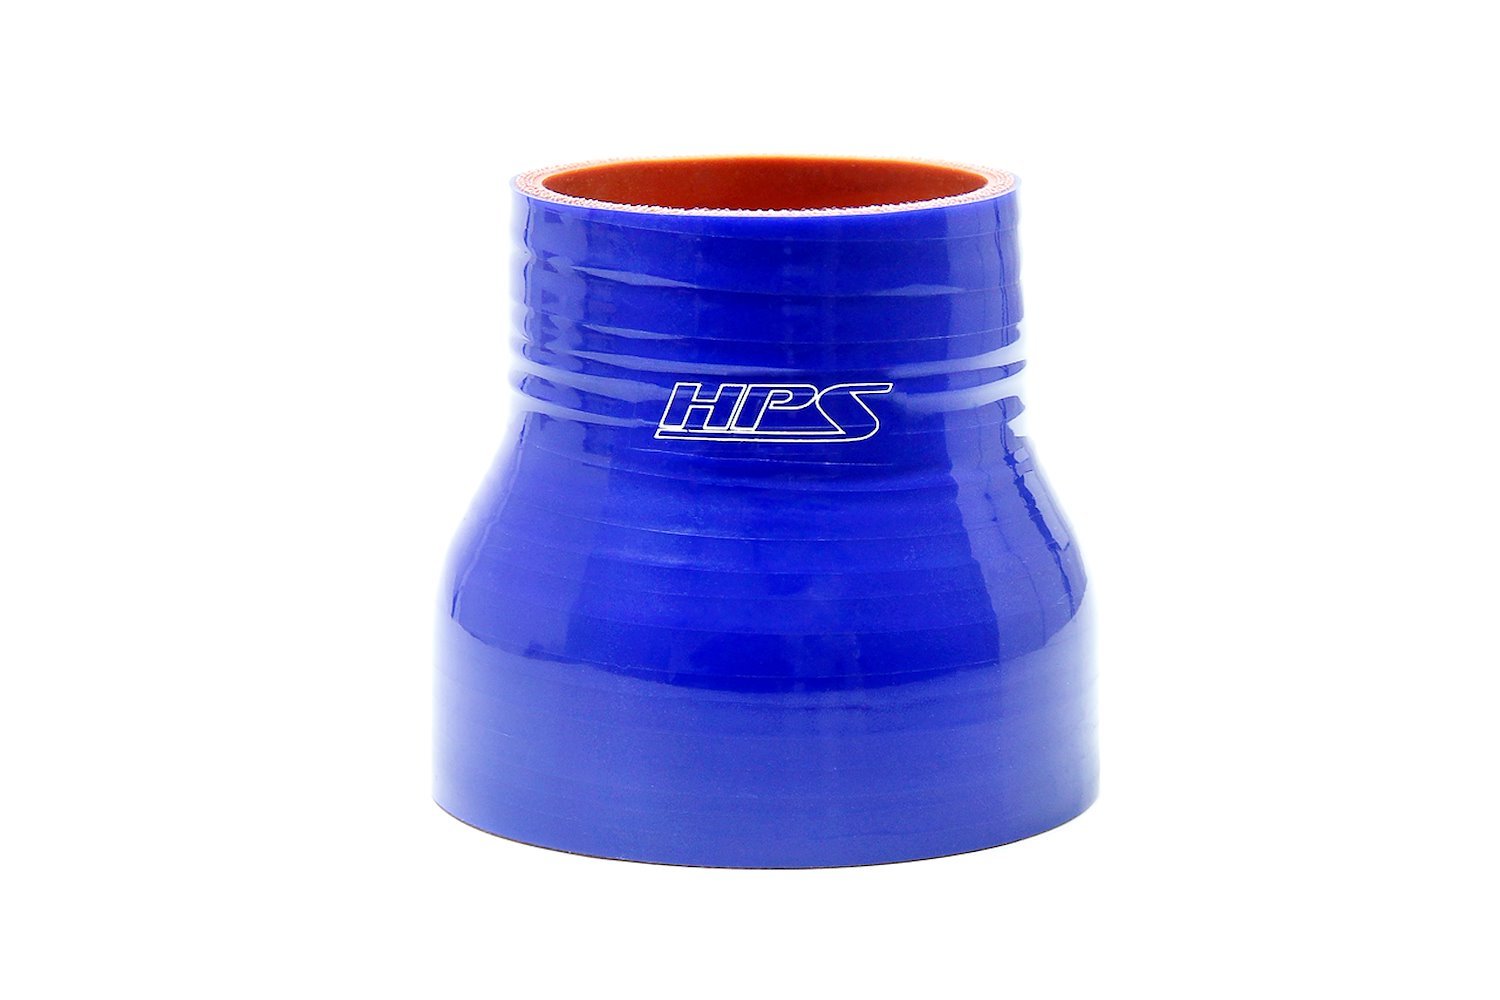 HTSR-150-187-BLUE Silicone Reducer Hose, High-Temp 4-Ply Reinforced, 1-1/2 in. - 1-7/8 in. ID, 3 in. Long, Blue